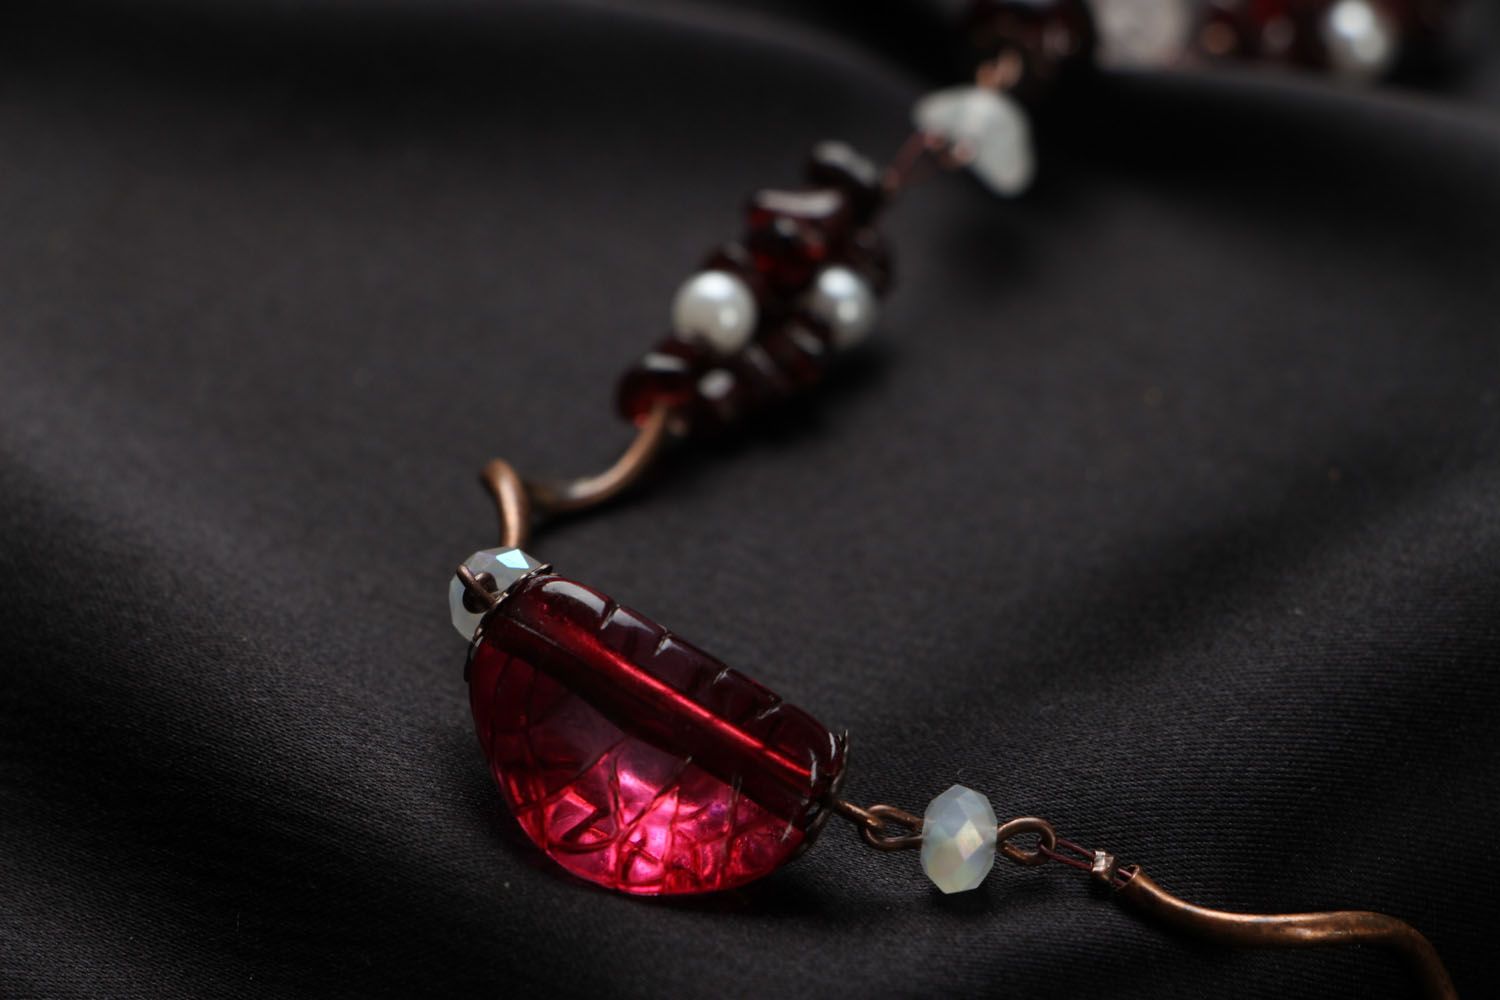 Necklace with natural stones photo 3